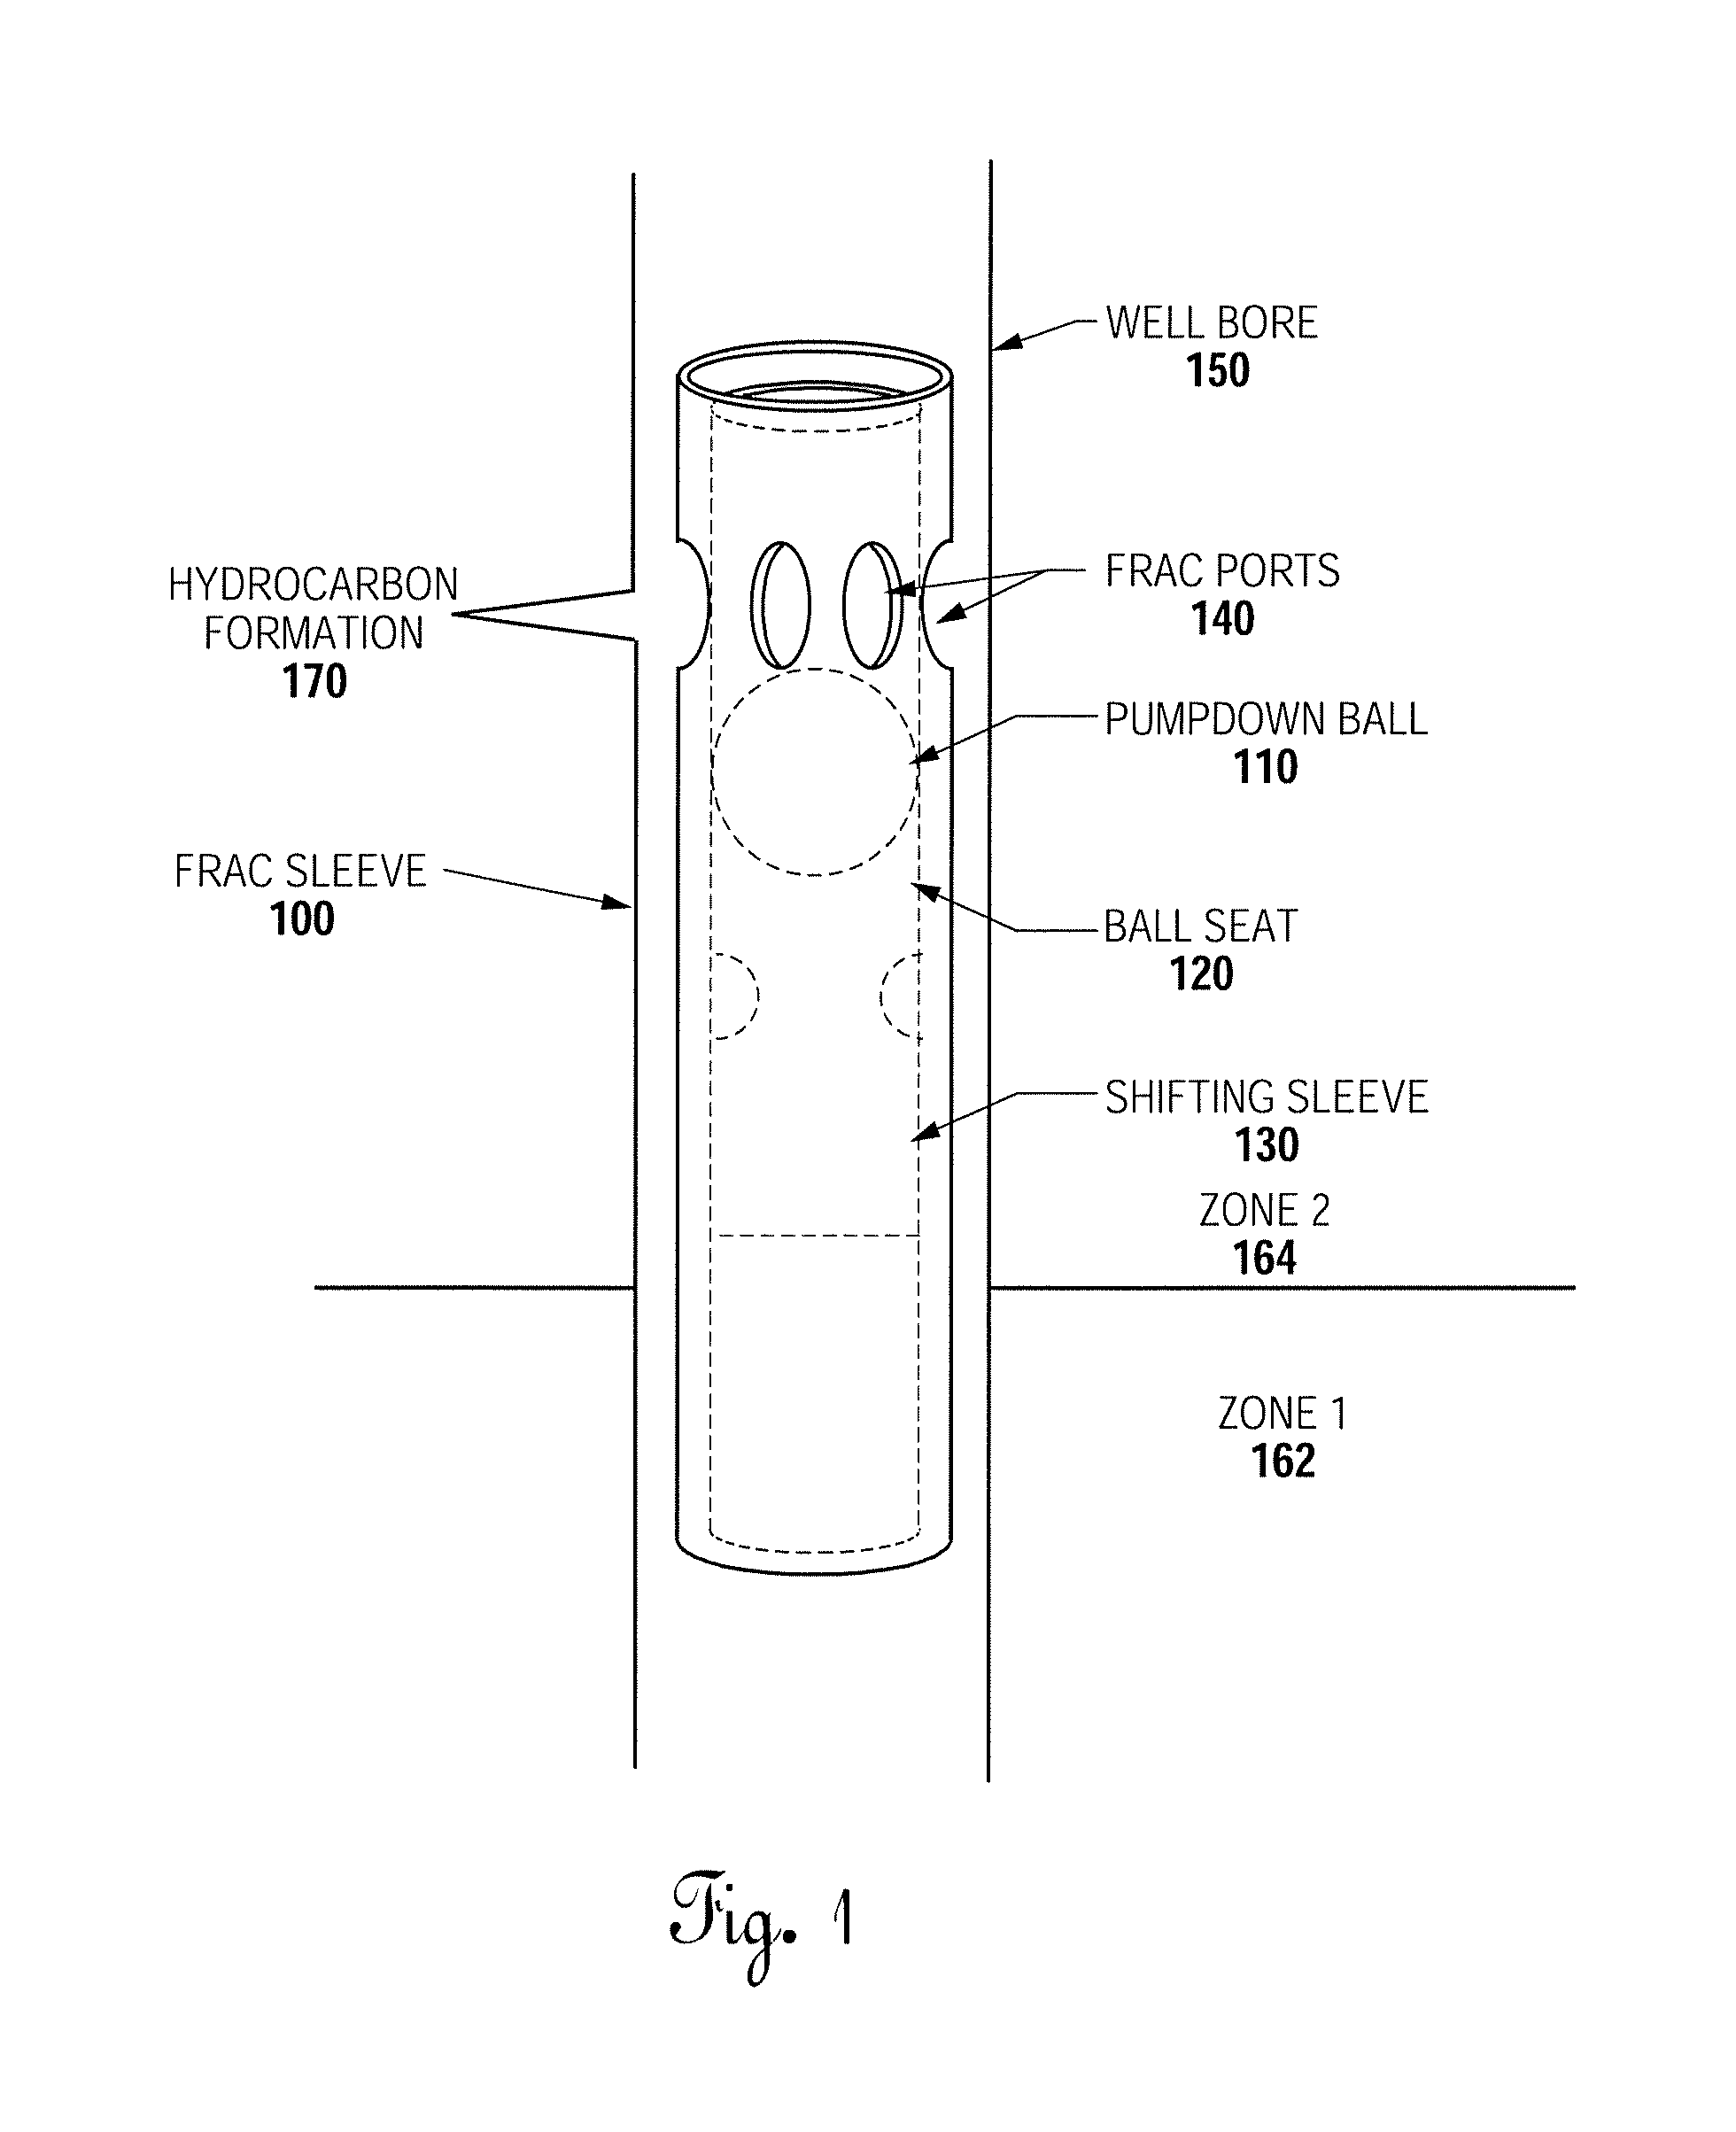 Downhole tools having non-toxic degradable elements and methods of using the same